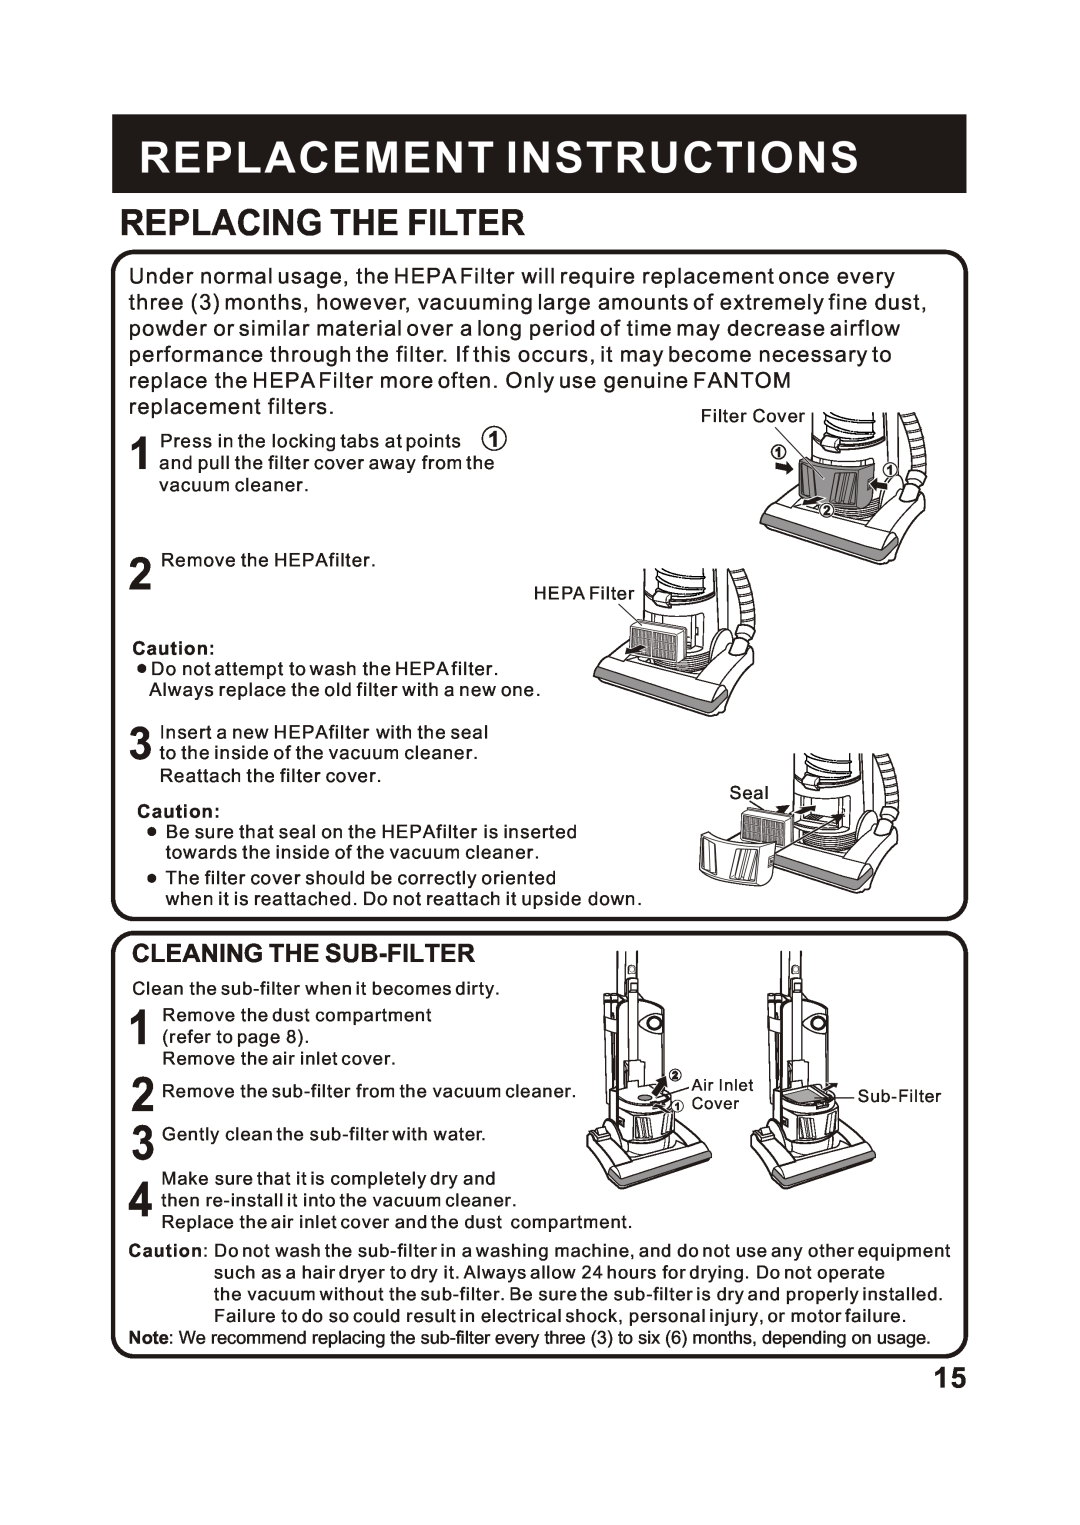 Fantom Vacuum FM742CS instruction manual Replacing The Filter, Cleaning The Sub-Filter, Replacement Instructions 